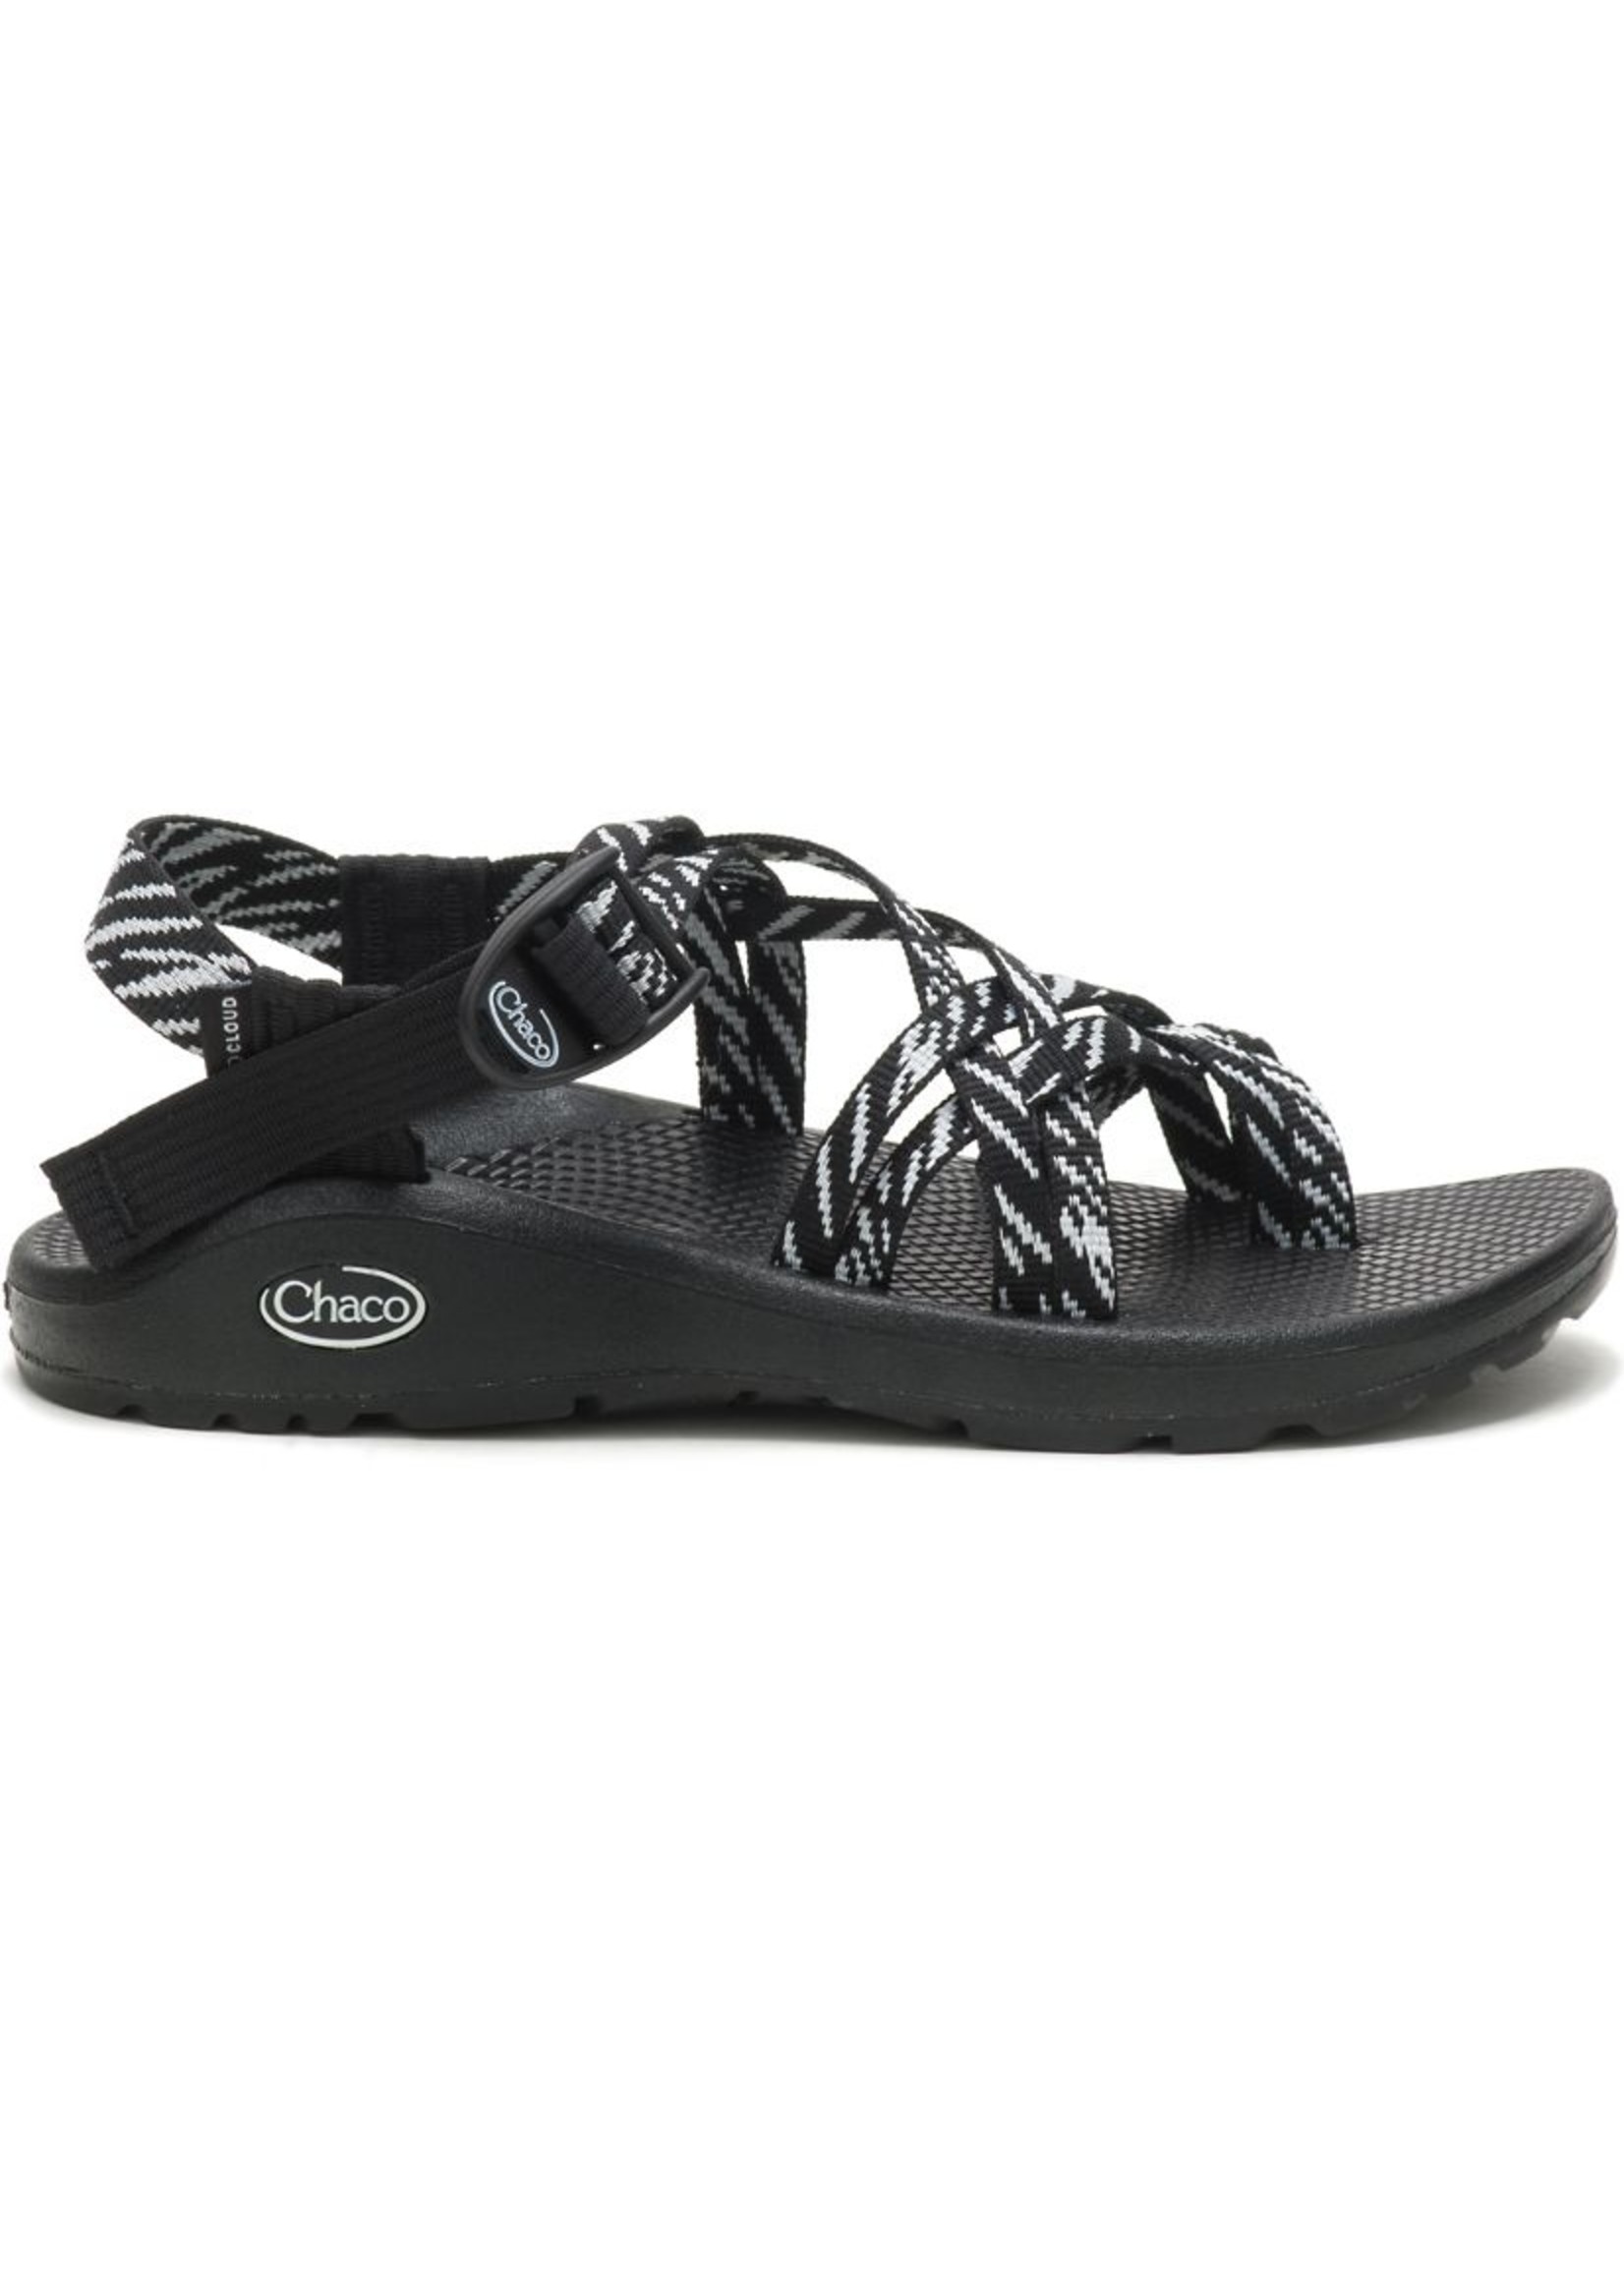 Chaco Womens Zcloud X2 Wily B&W